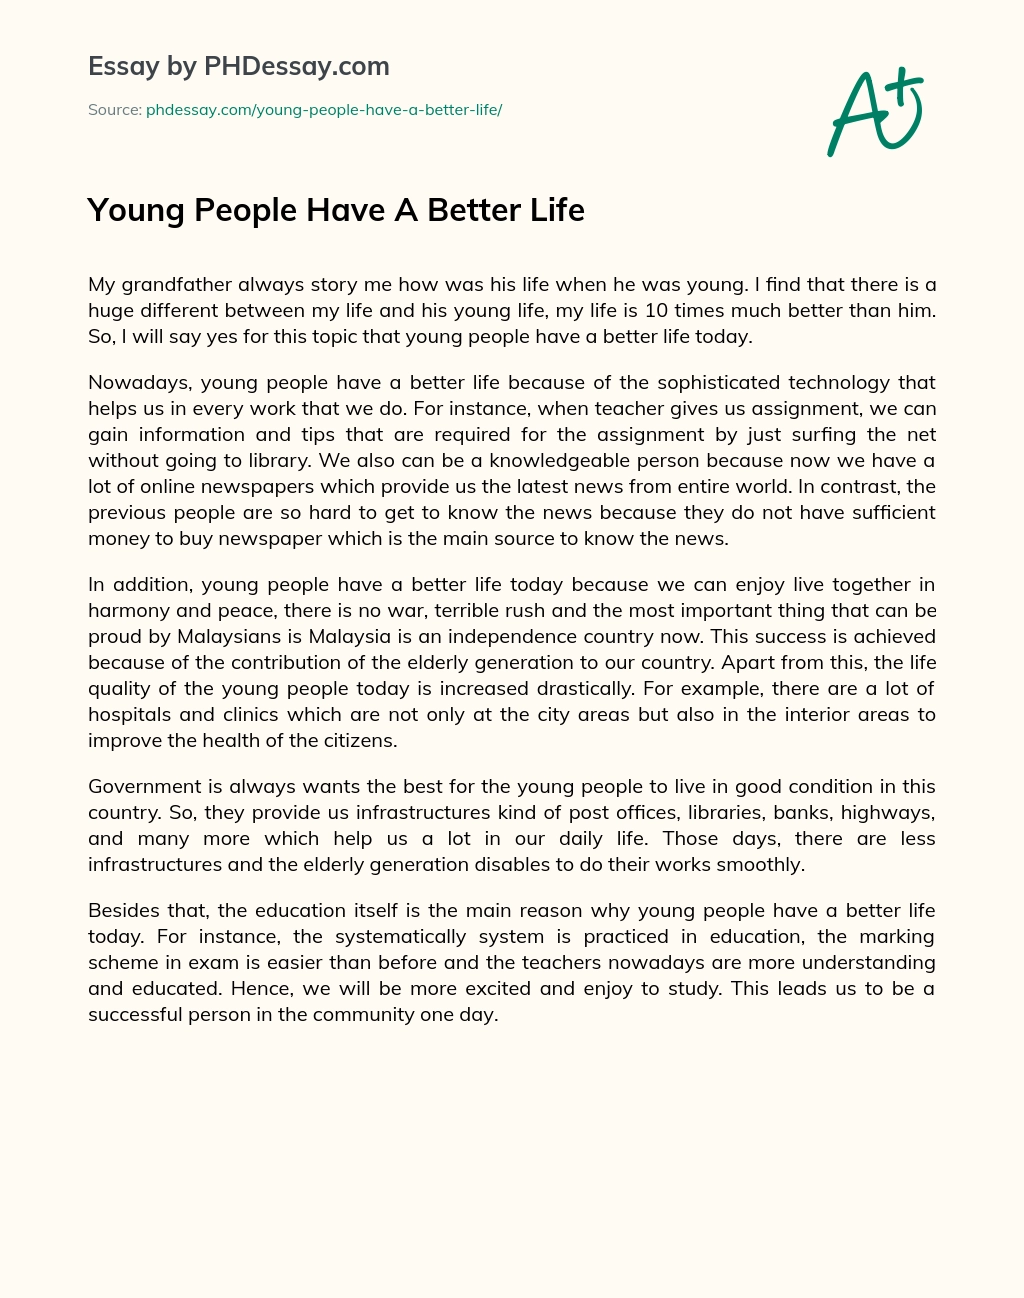 Young People Have A Better Life essay